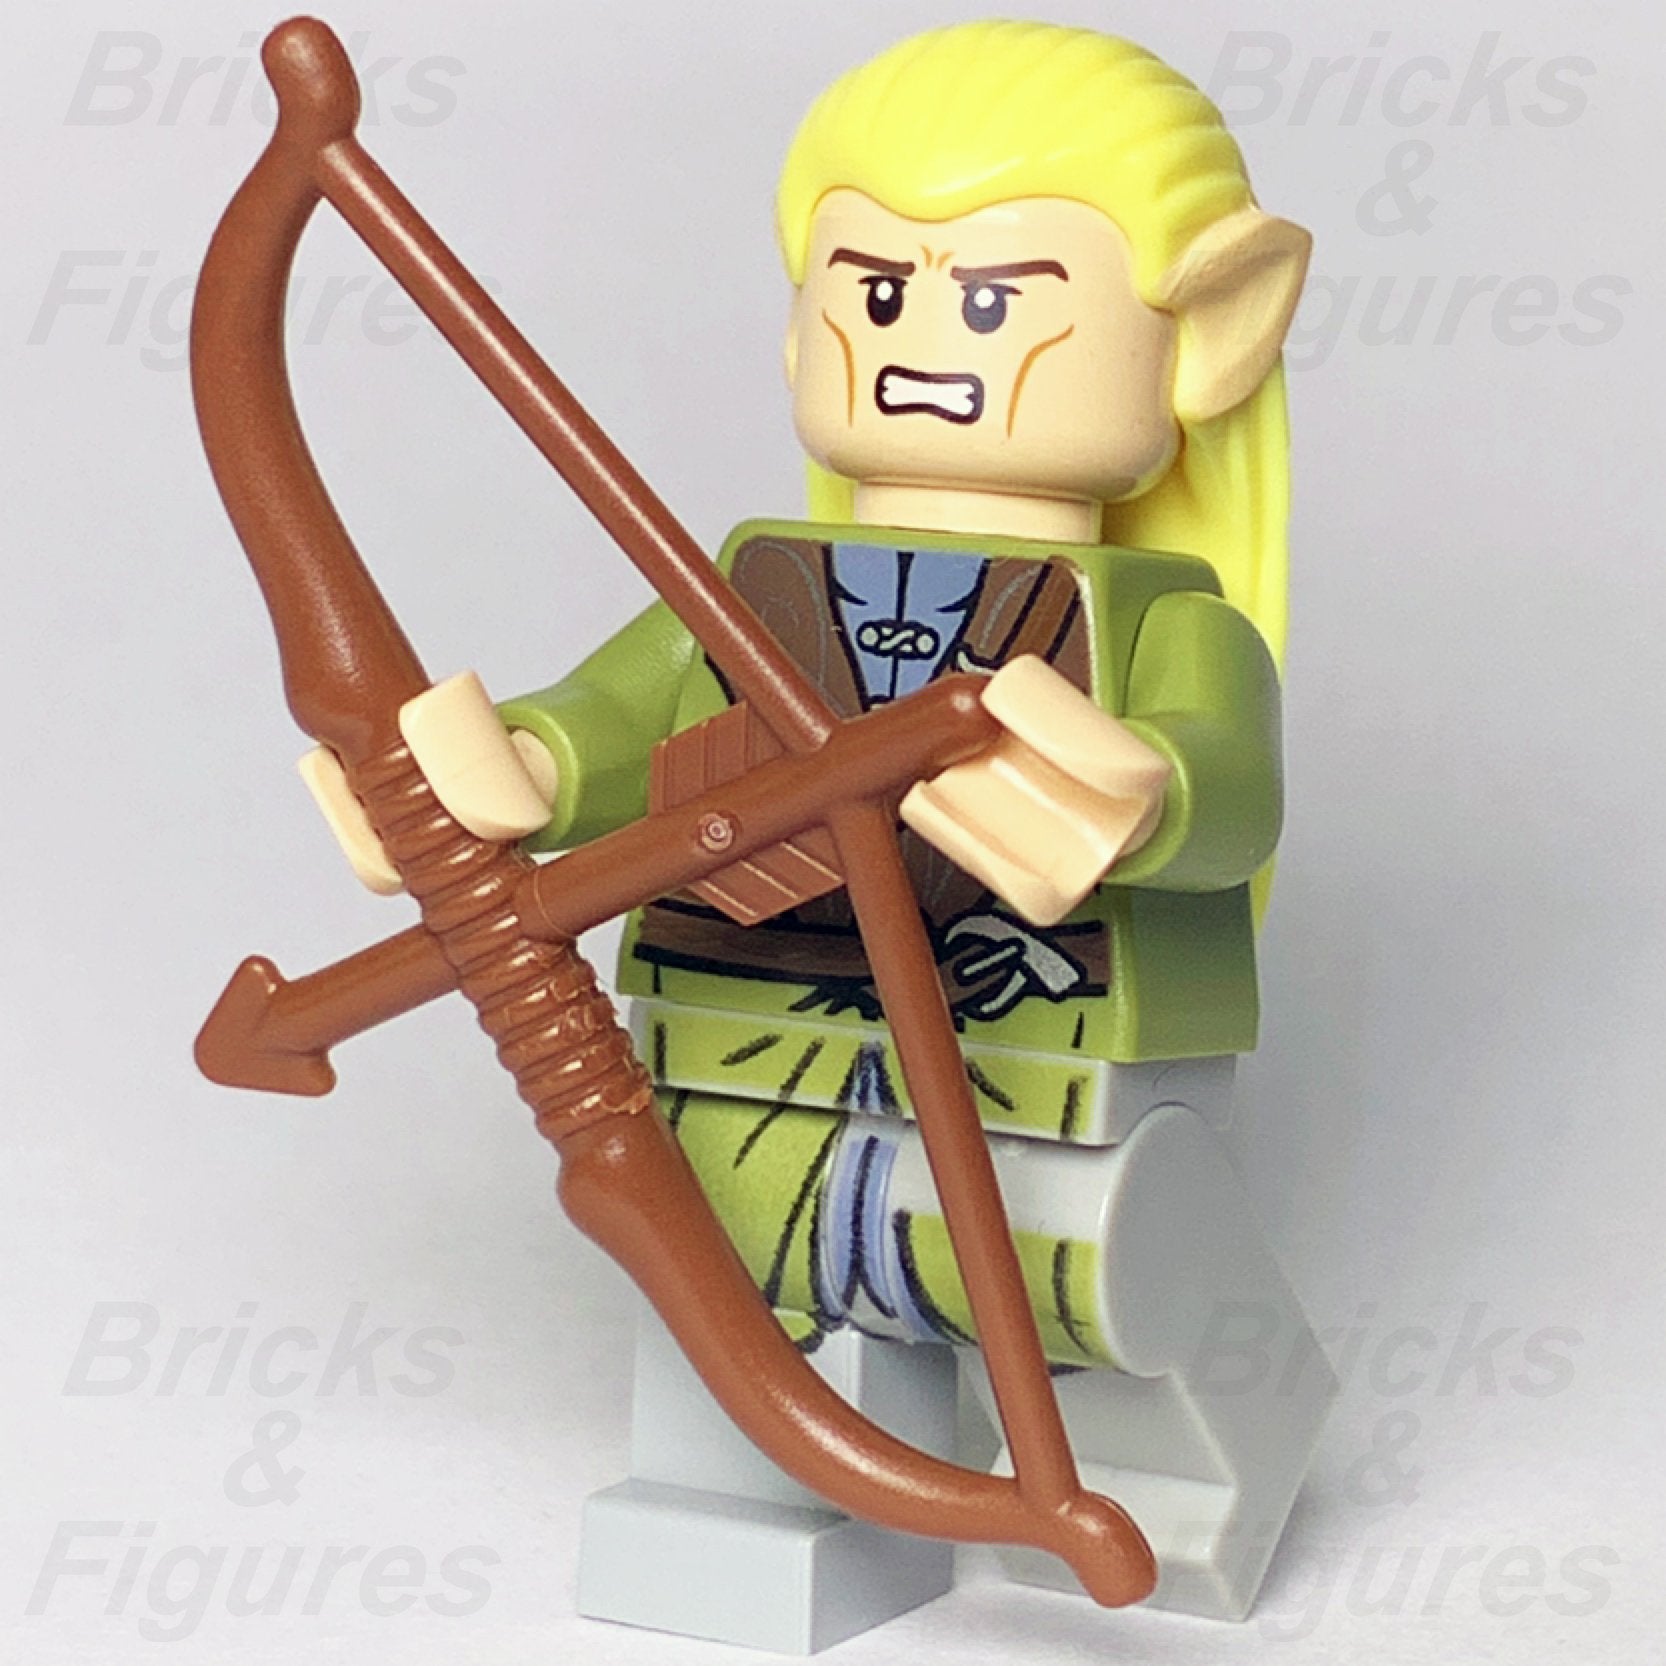 LEGO the lord of the rings minifigures